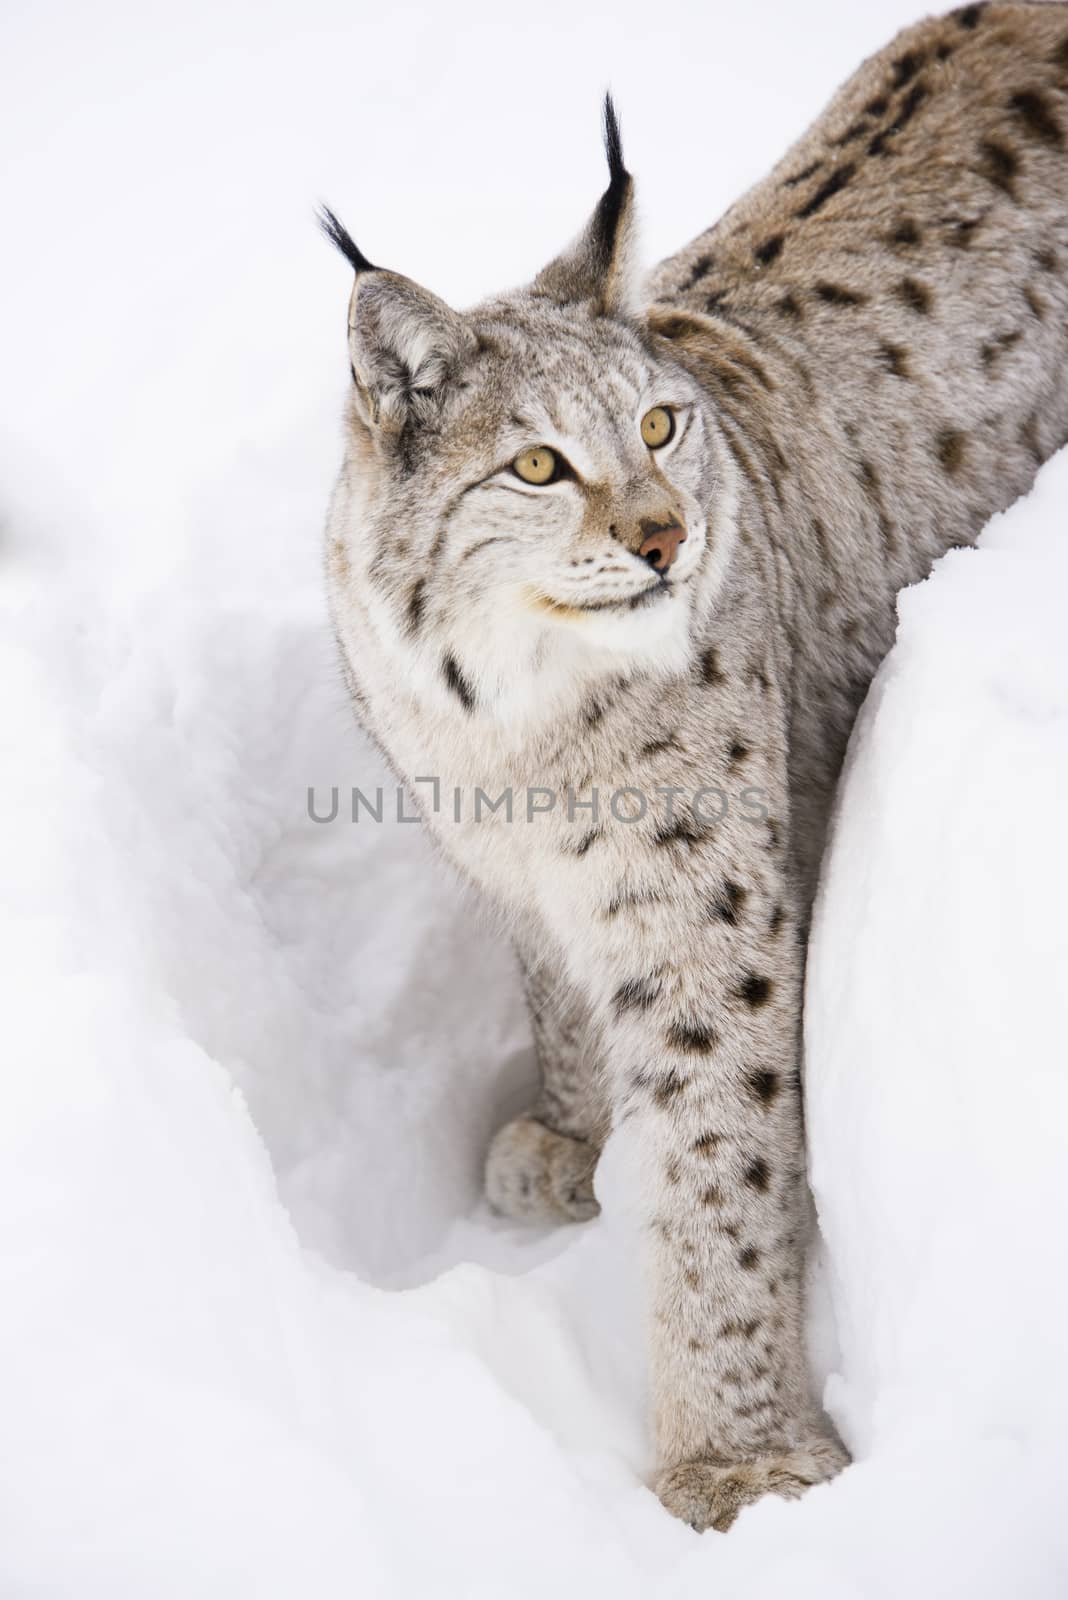 A lynx is walking in the snow. Isolated against the snow